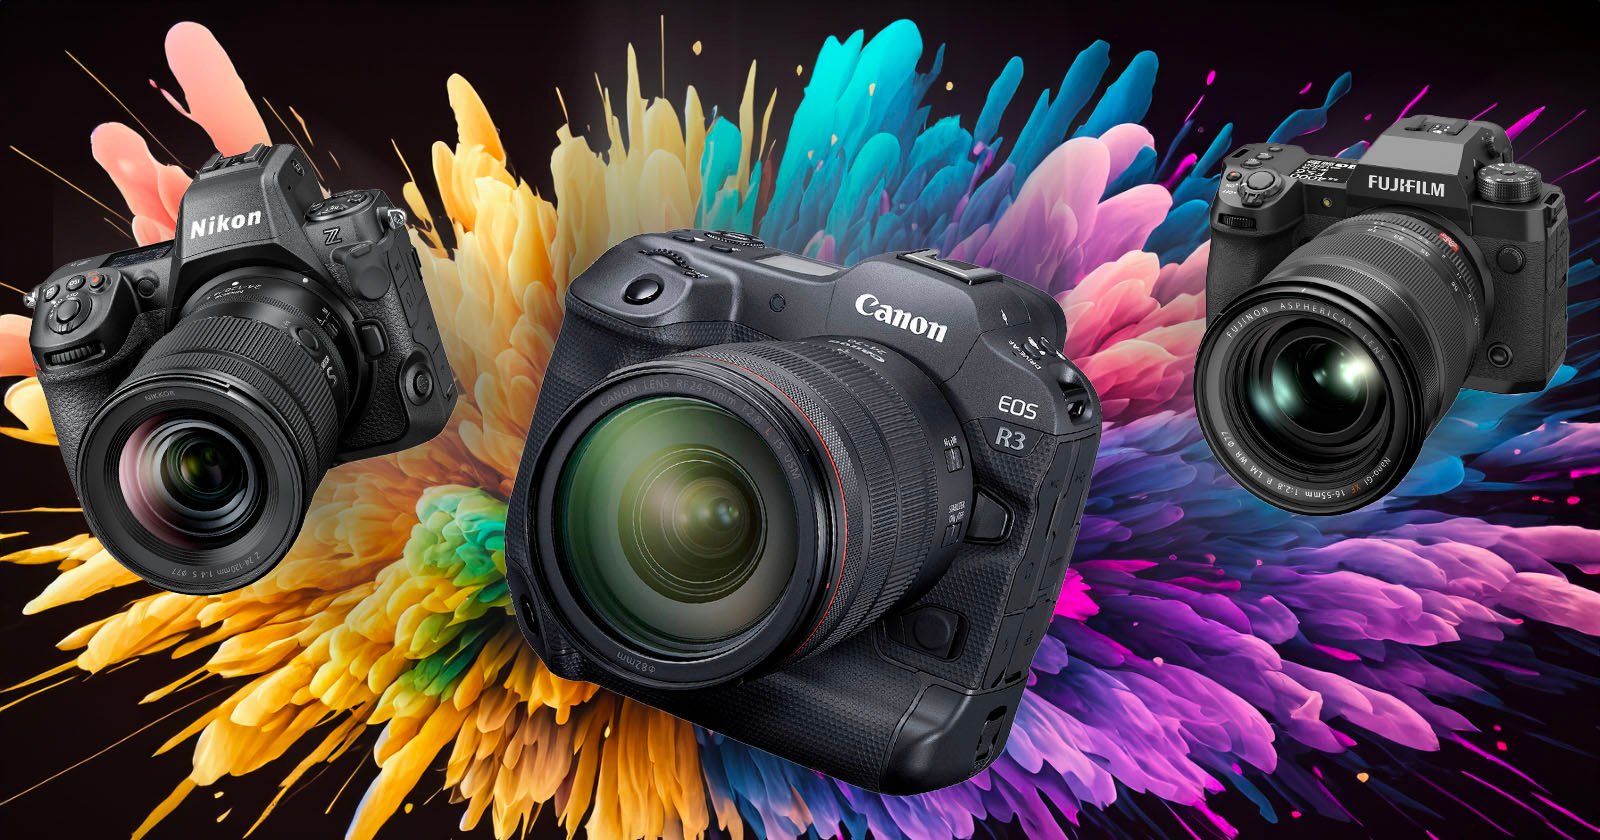 Just About Every Major Camera Brand is Having a Sale Right Now